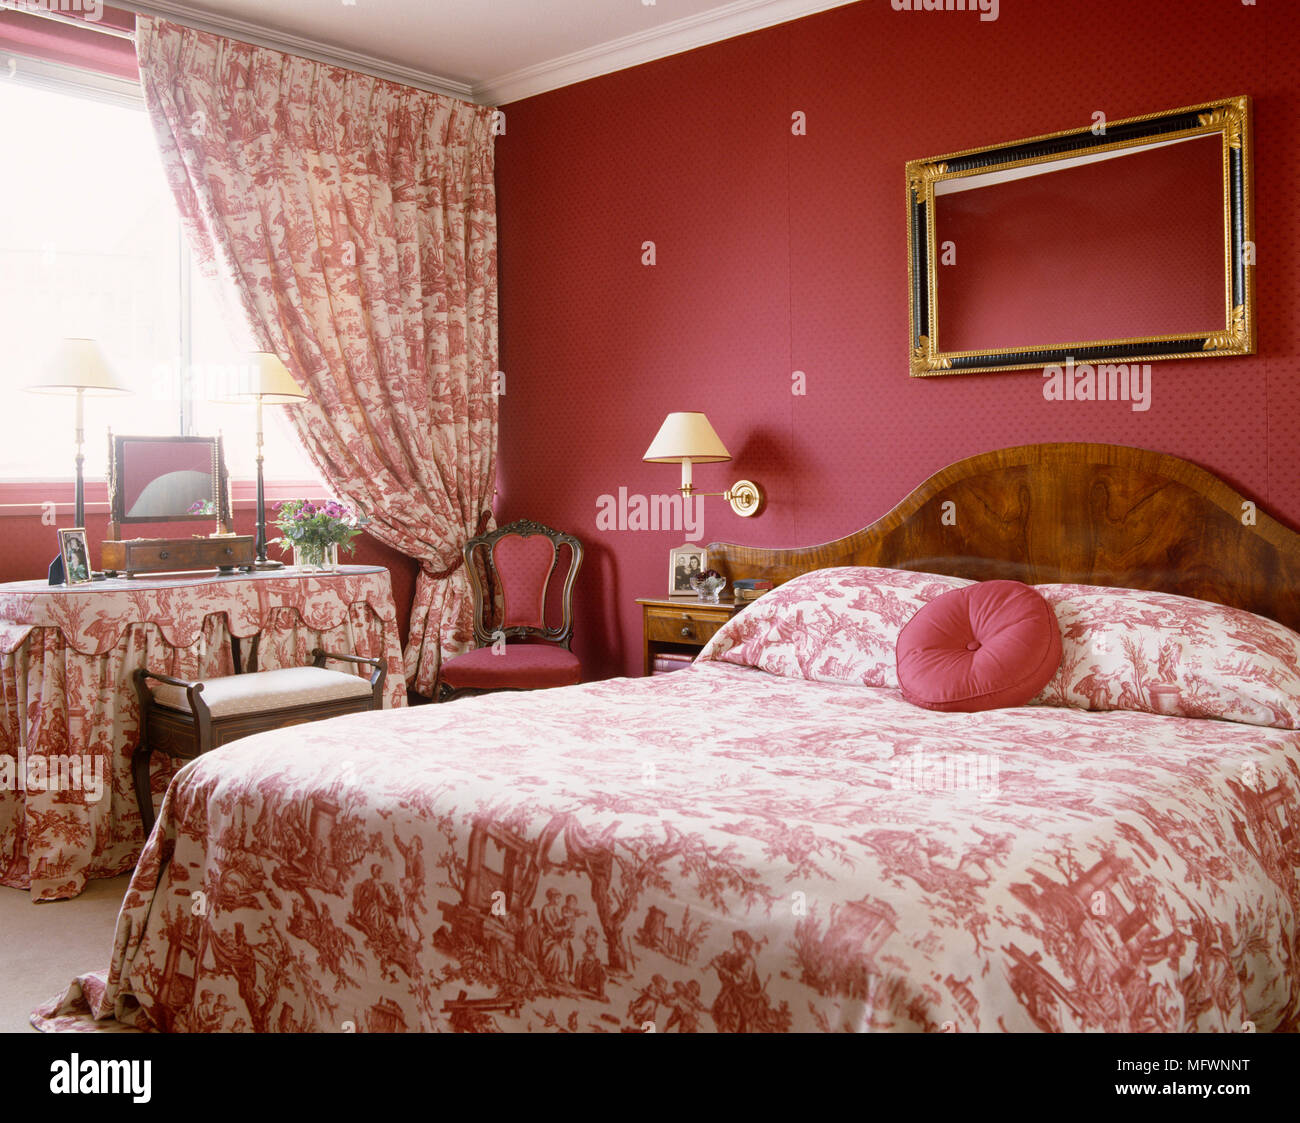 Double bed with pink and white toile de Jouy bed linen and coordinating curtains Stock Photo